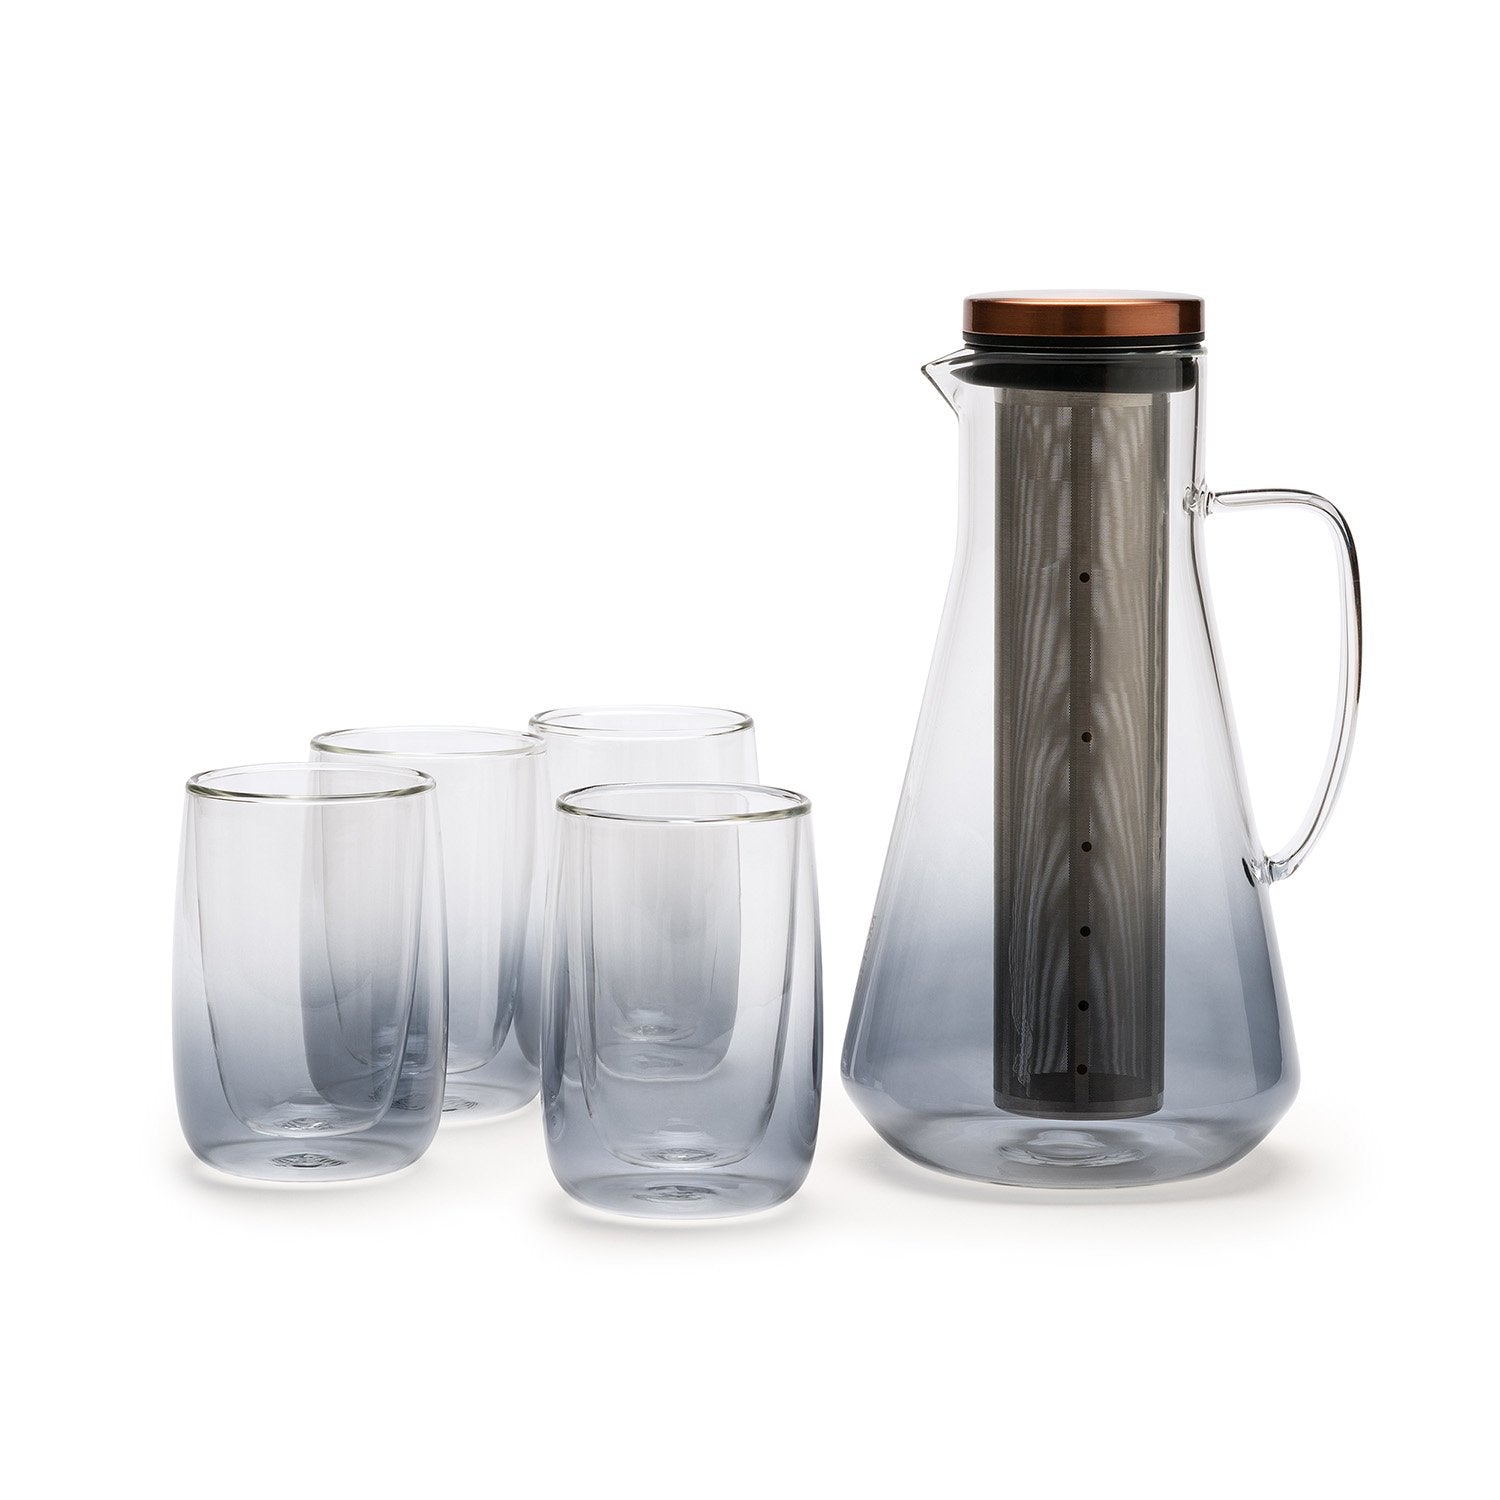 Pitcher with four glass cups